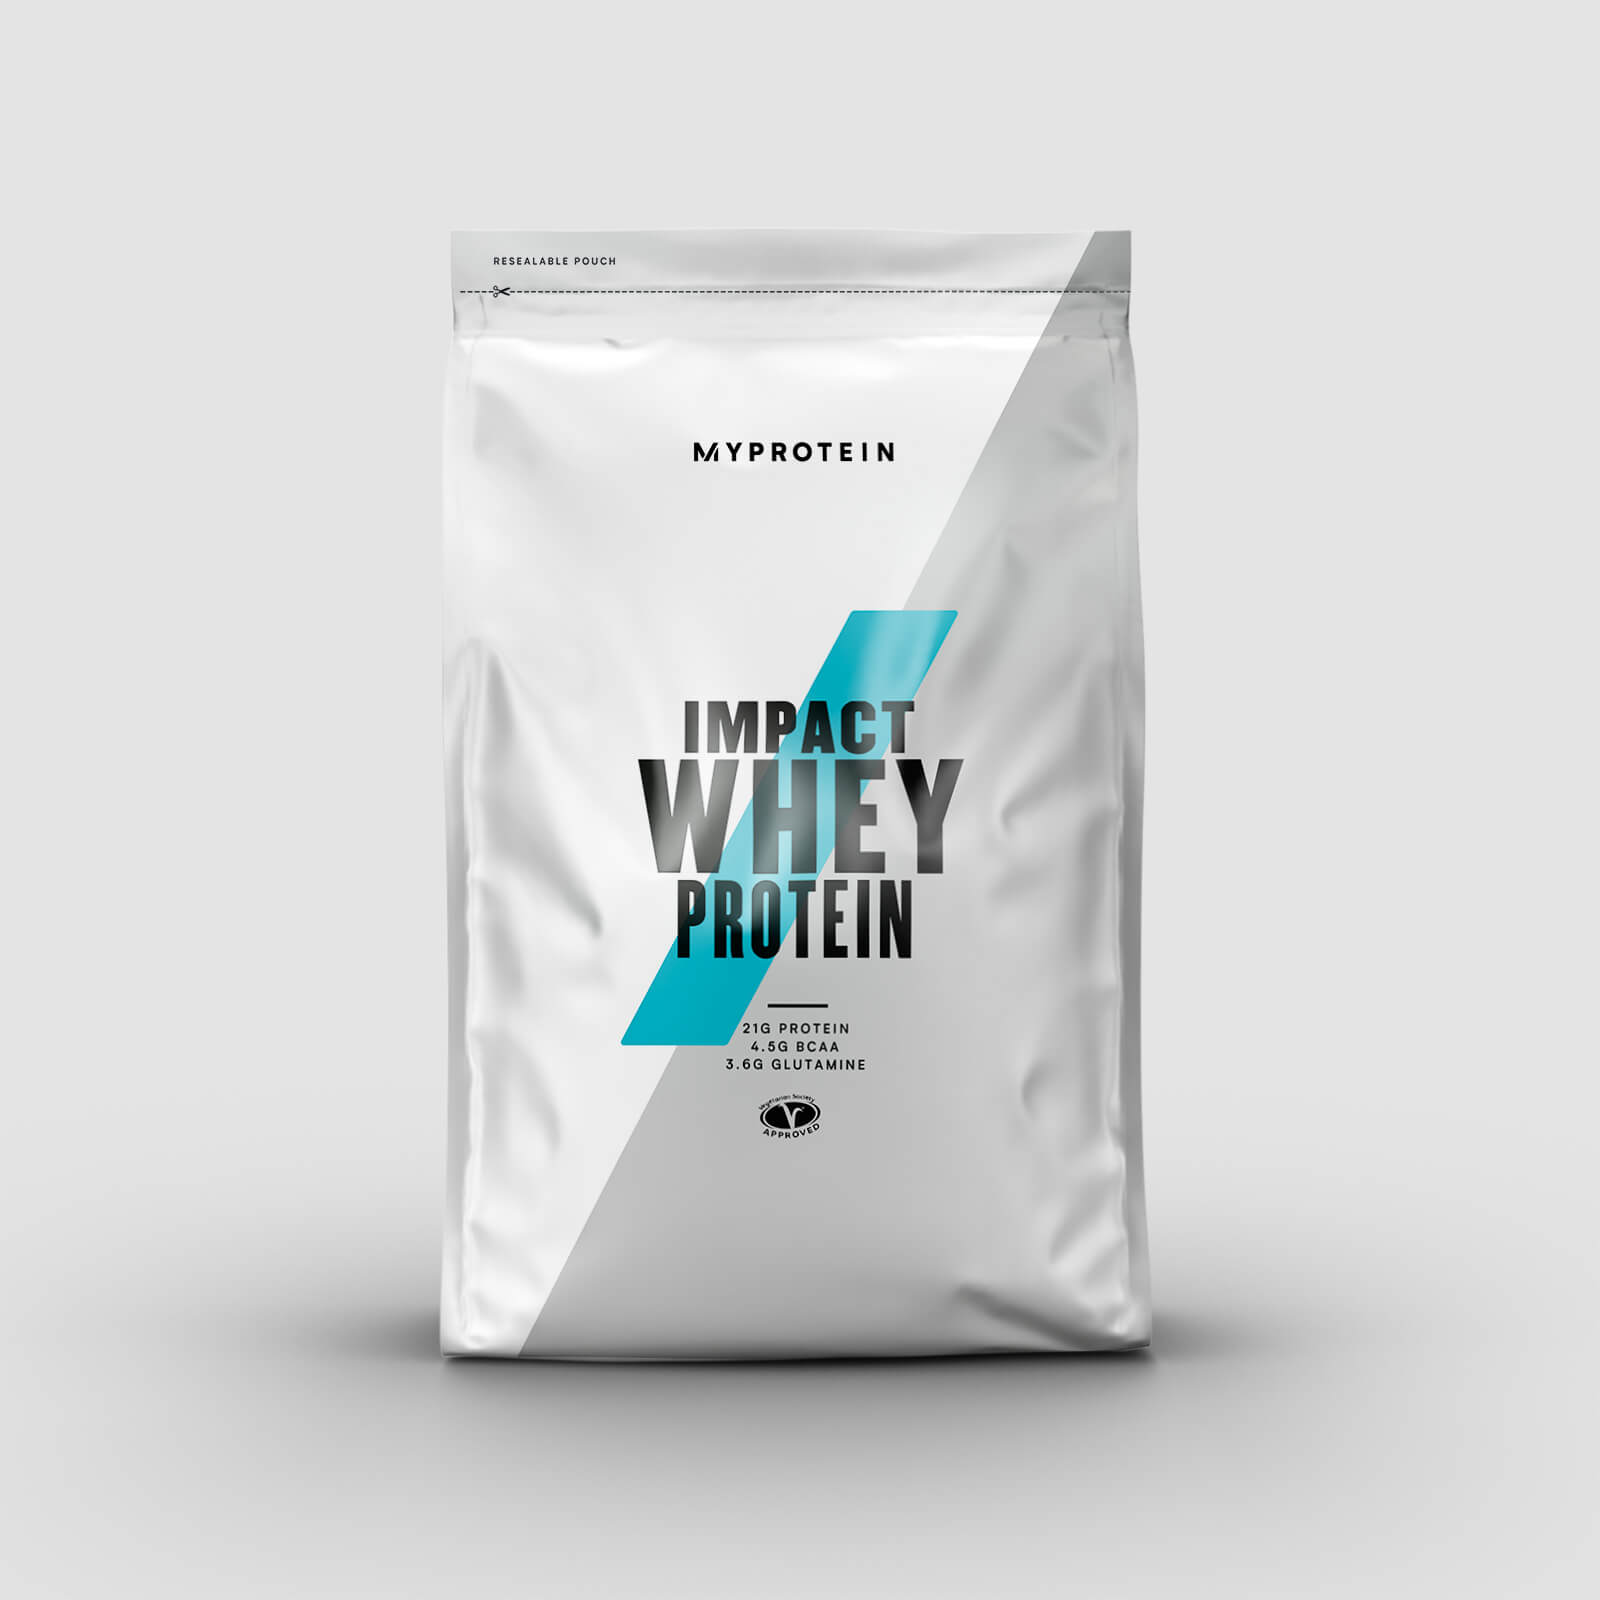 Myprotein Impact Whey Protein - 2.5kg - Raspberry - New and Improved